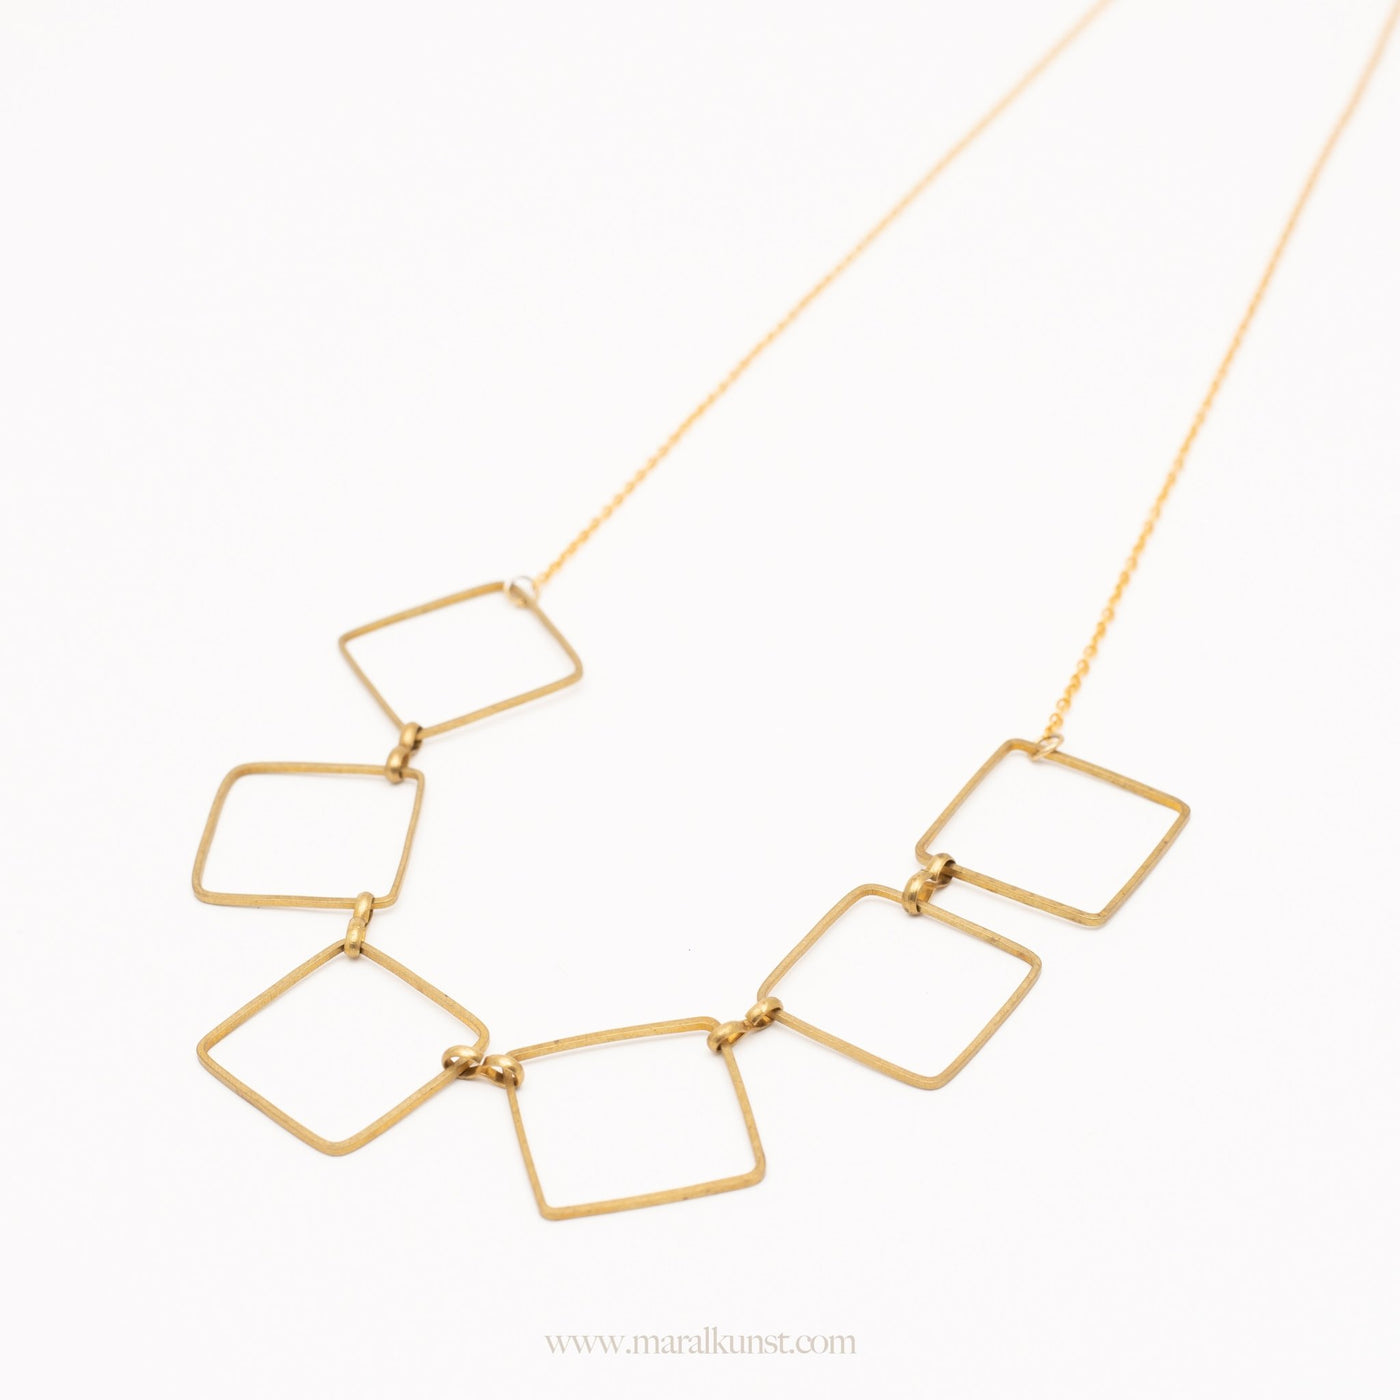 Square brass & steel chain - Maral Kunst Jewelry